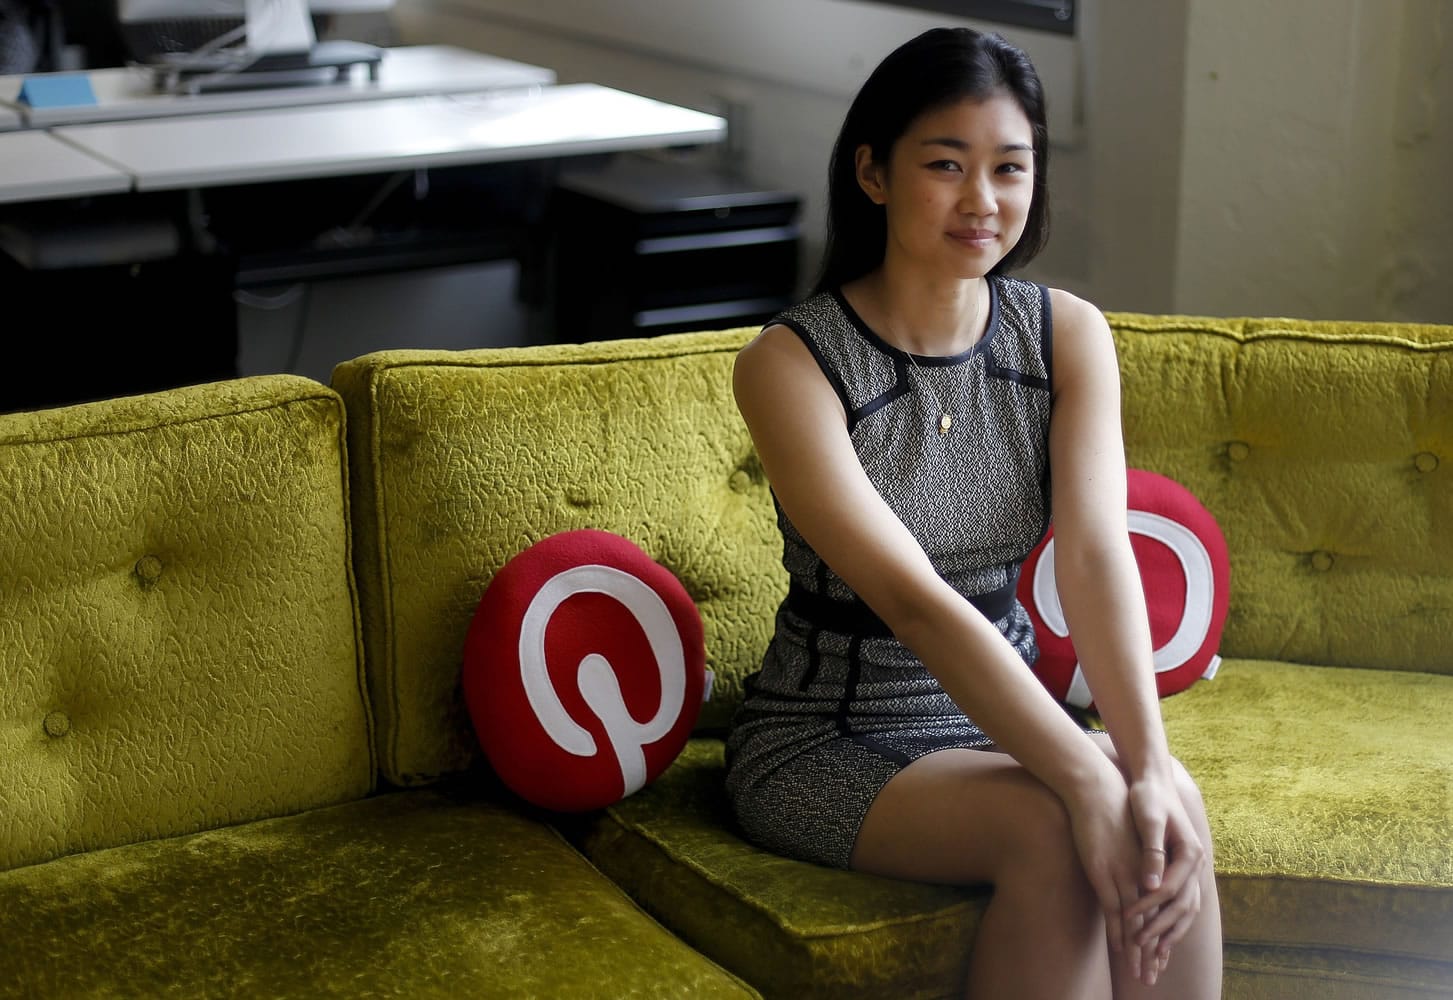 Tracy Chou is an engineer at Pinterest, and is also one of the more high profile women in the tech industry.